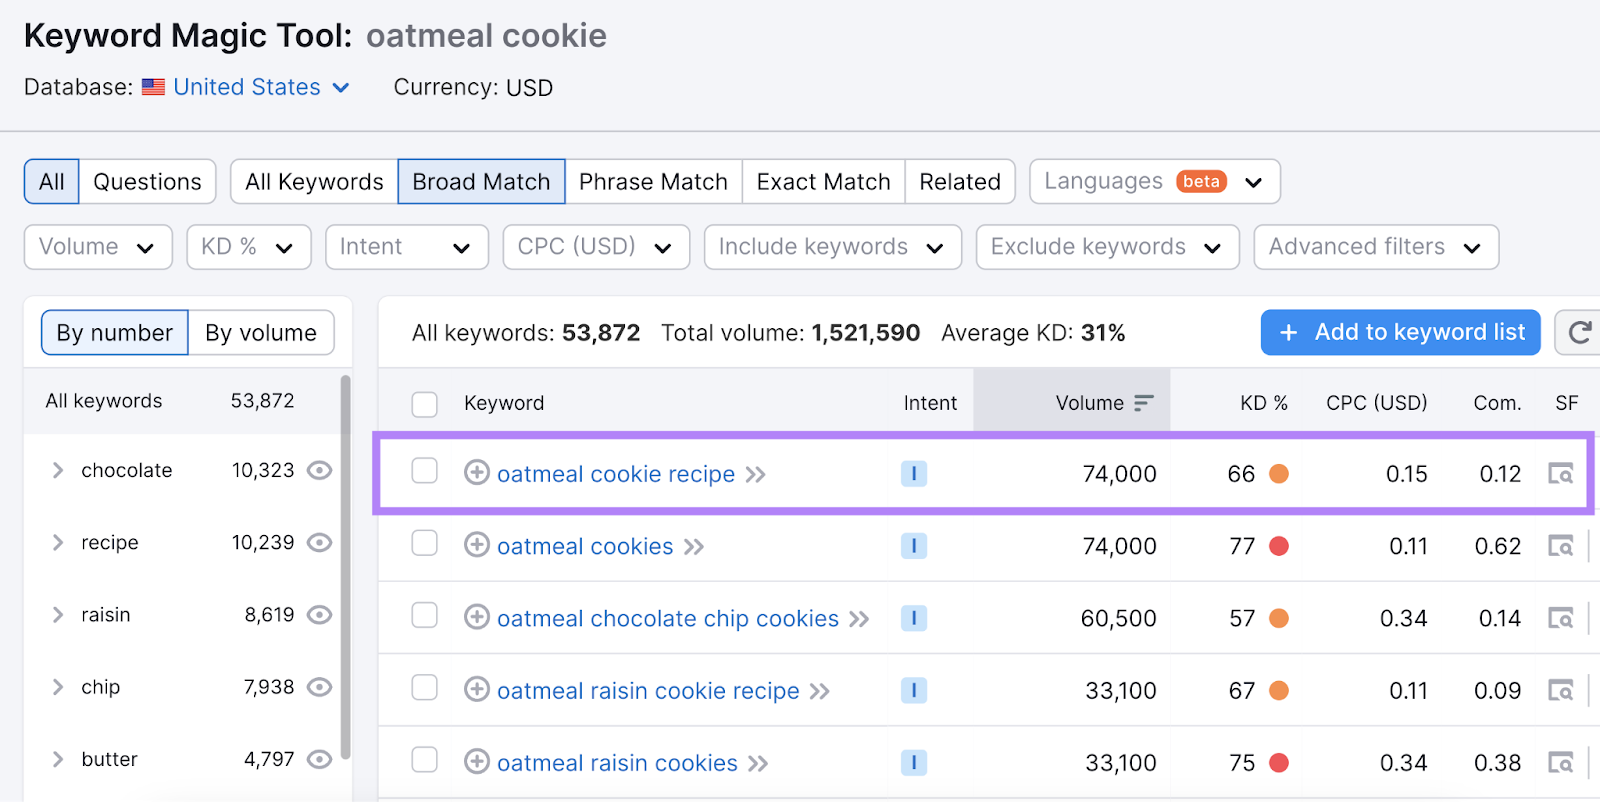 "oatmeal cookie recipe" has 66% keyword difficulty compared to "oatmeal cookies" with has 77% keyword difficulty